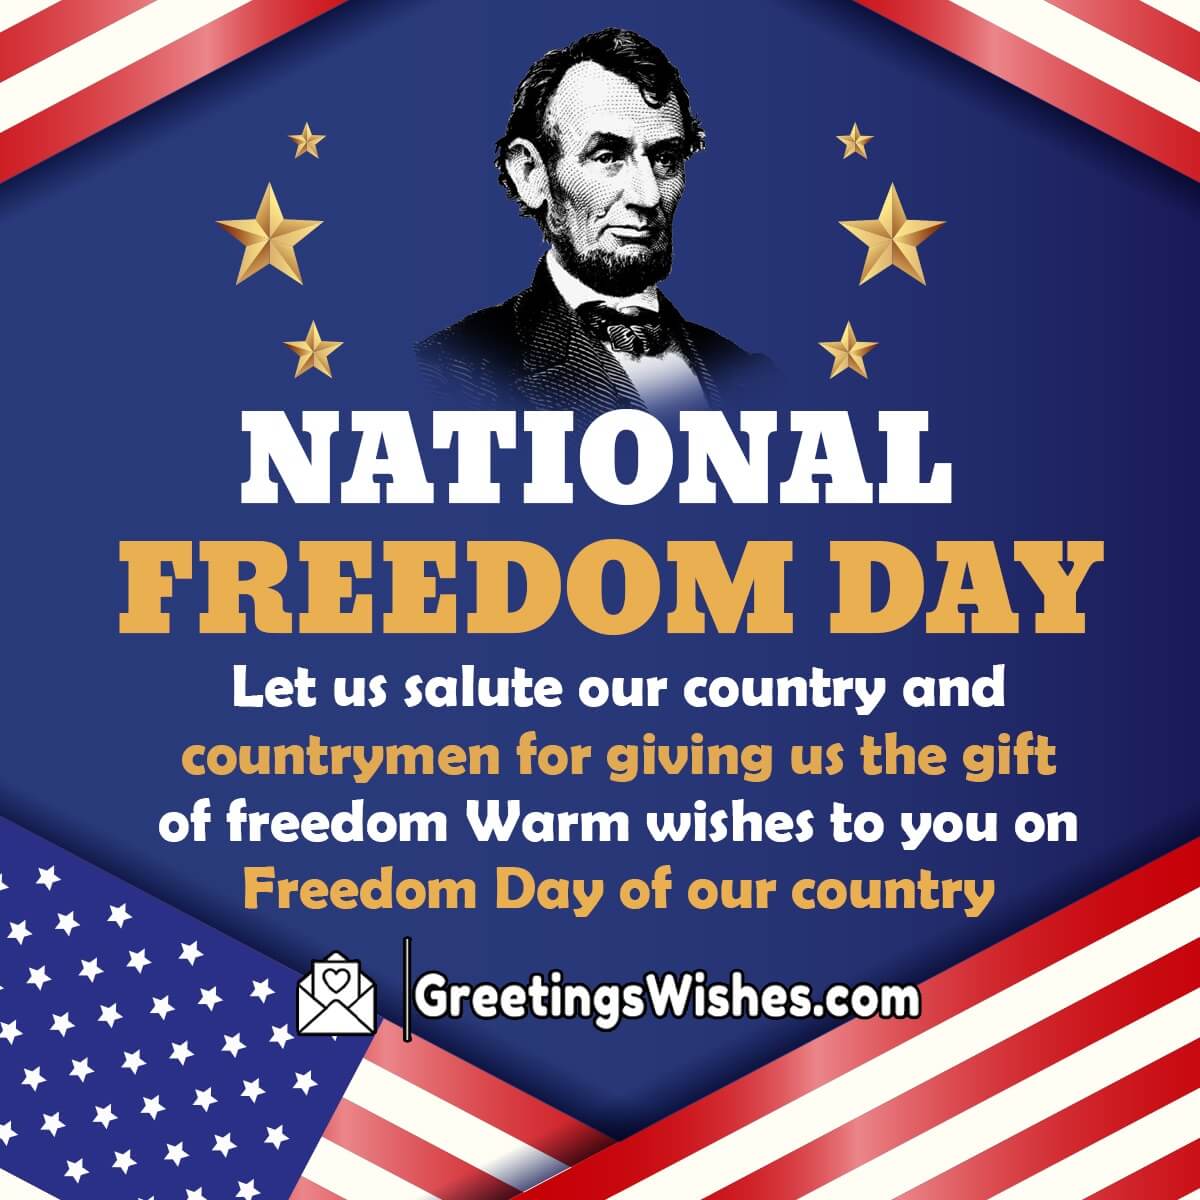 National Freedom Day Wishes (1 February) Greetings Wishes